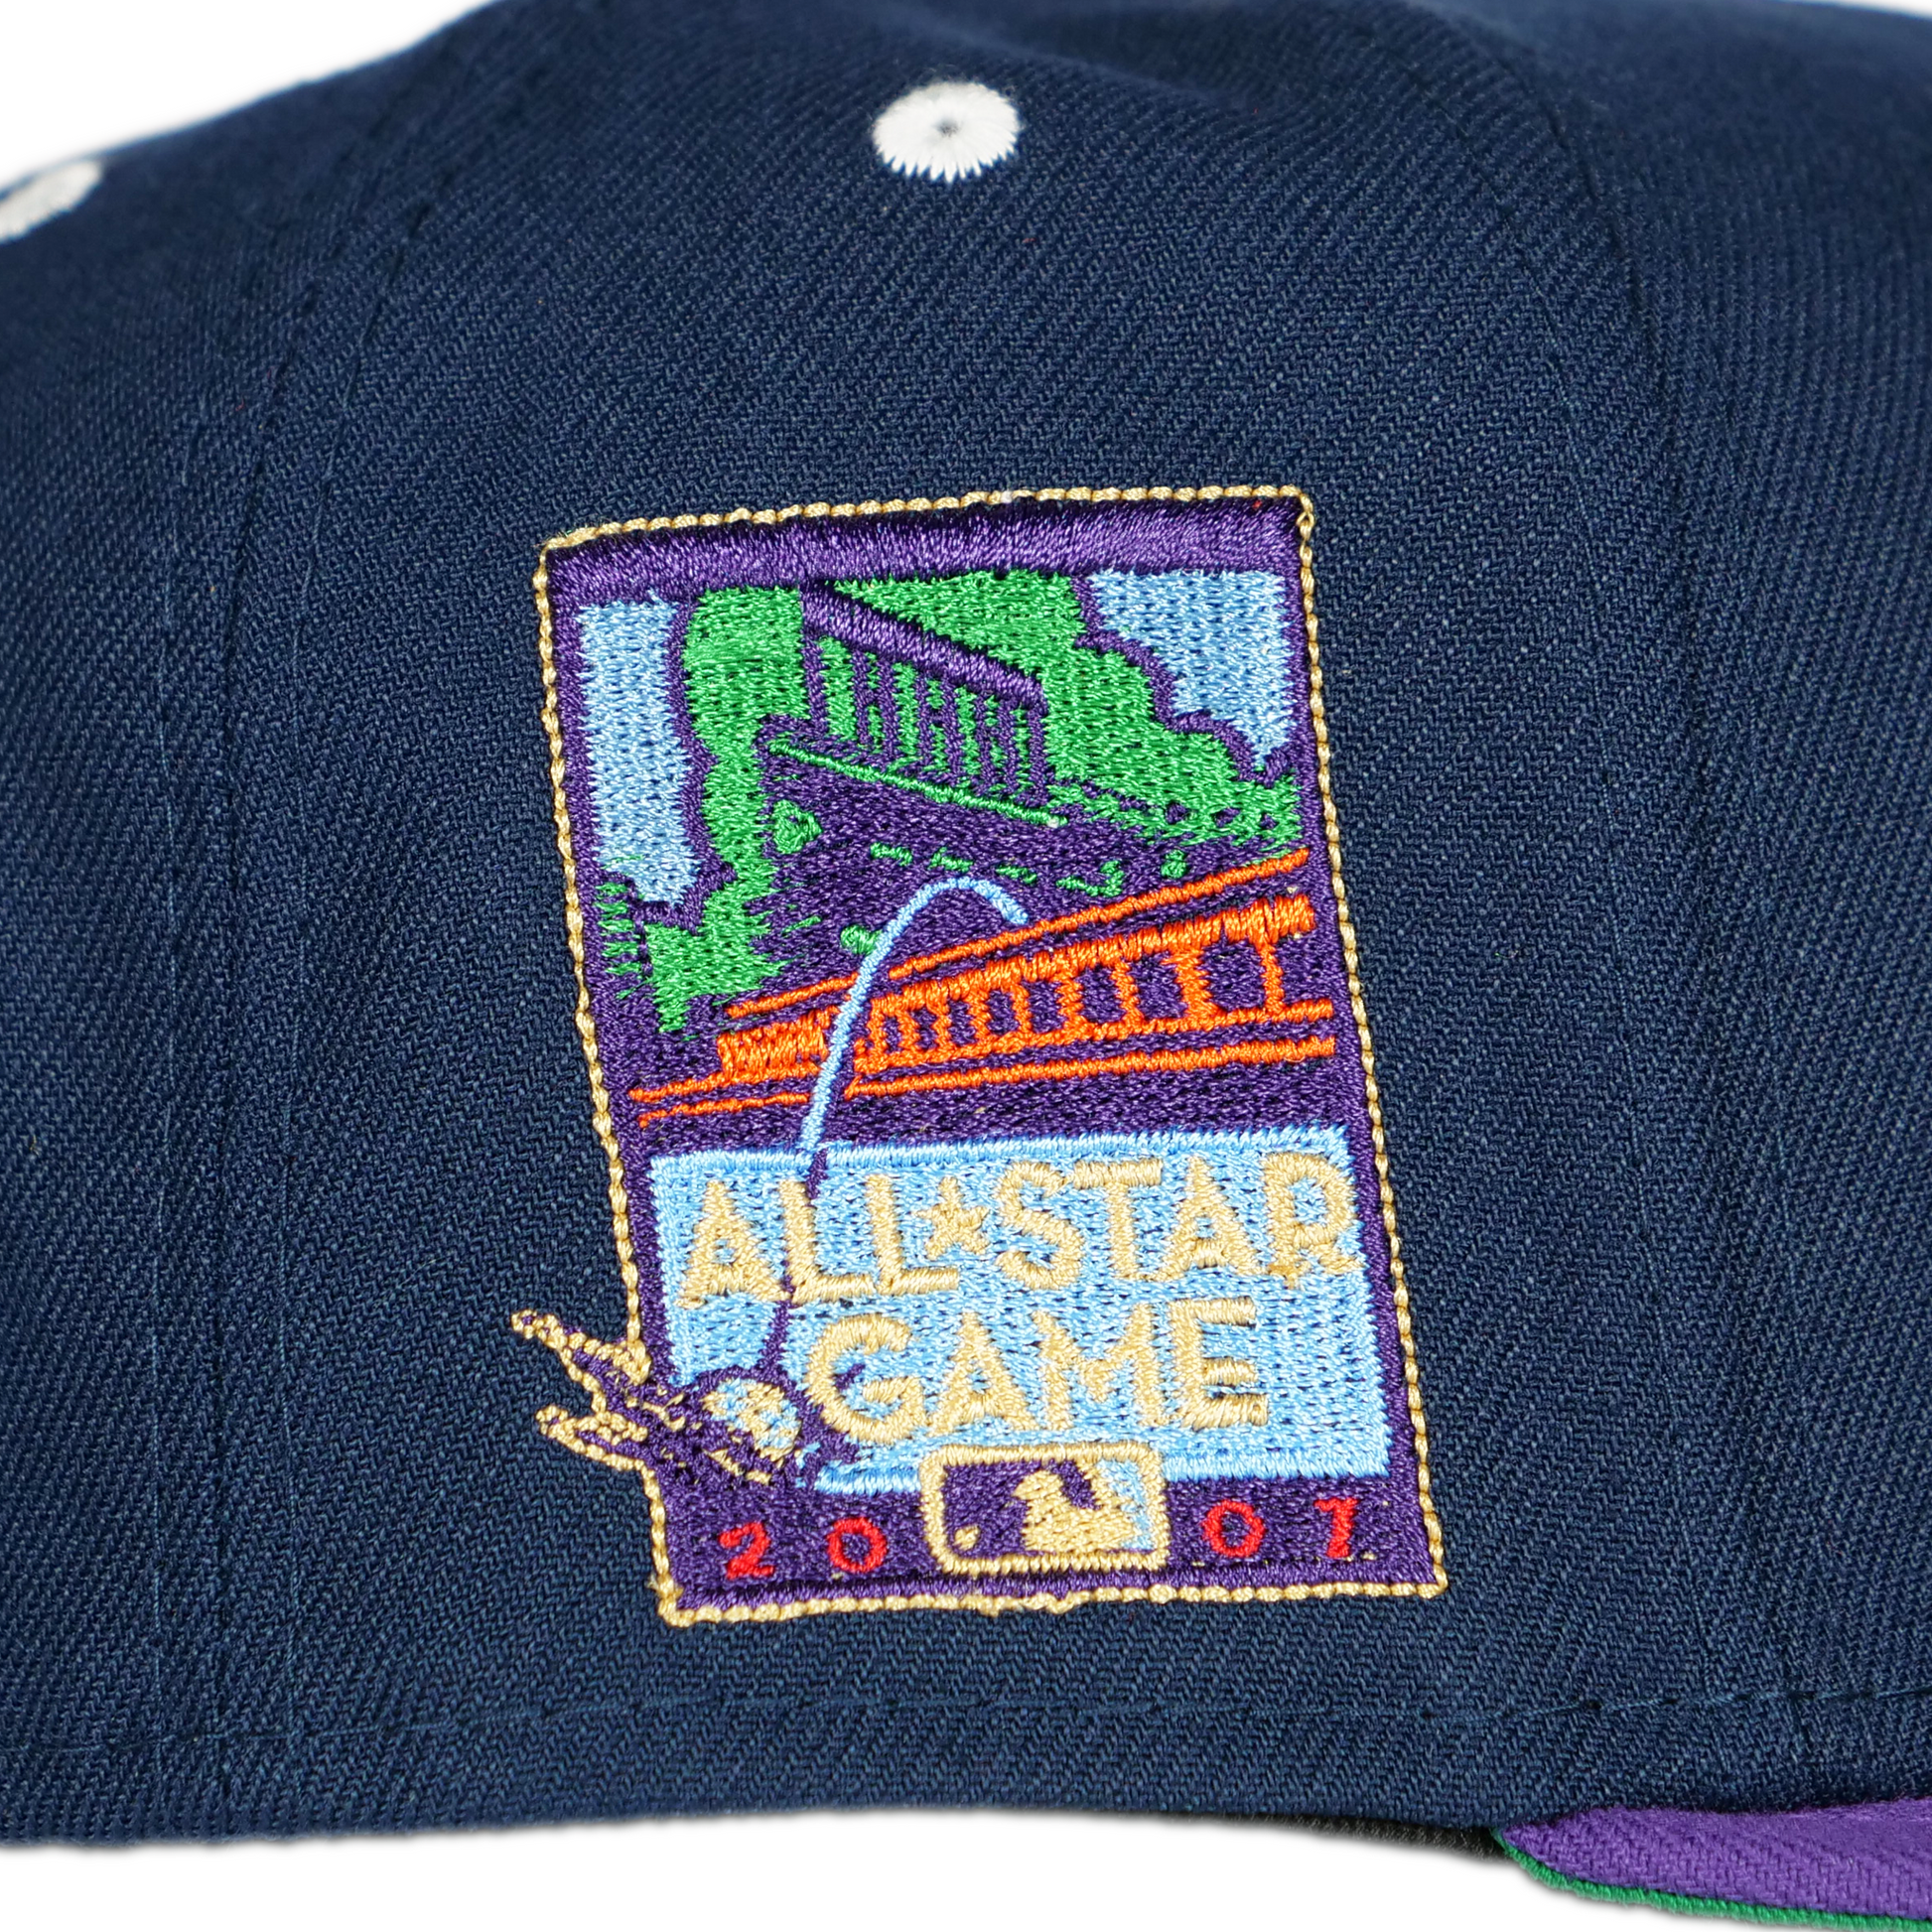 New Era San Francisco Giants 59FIFTY Fitted Hat - Navy Blue/ Purple/ Green 8